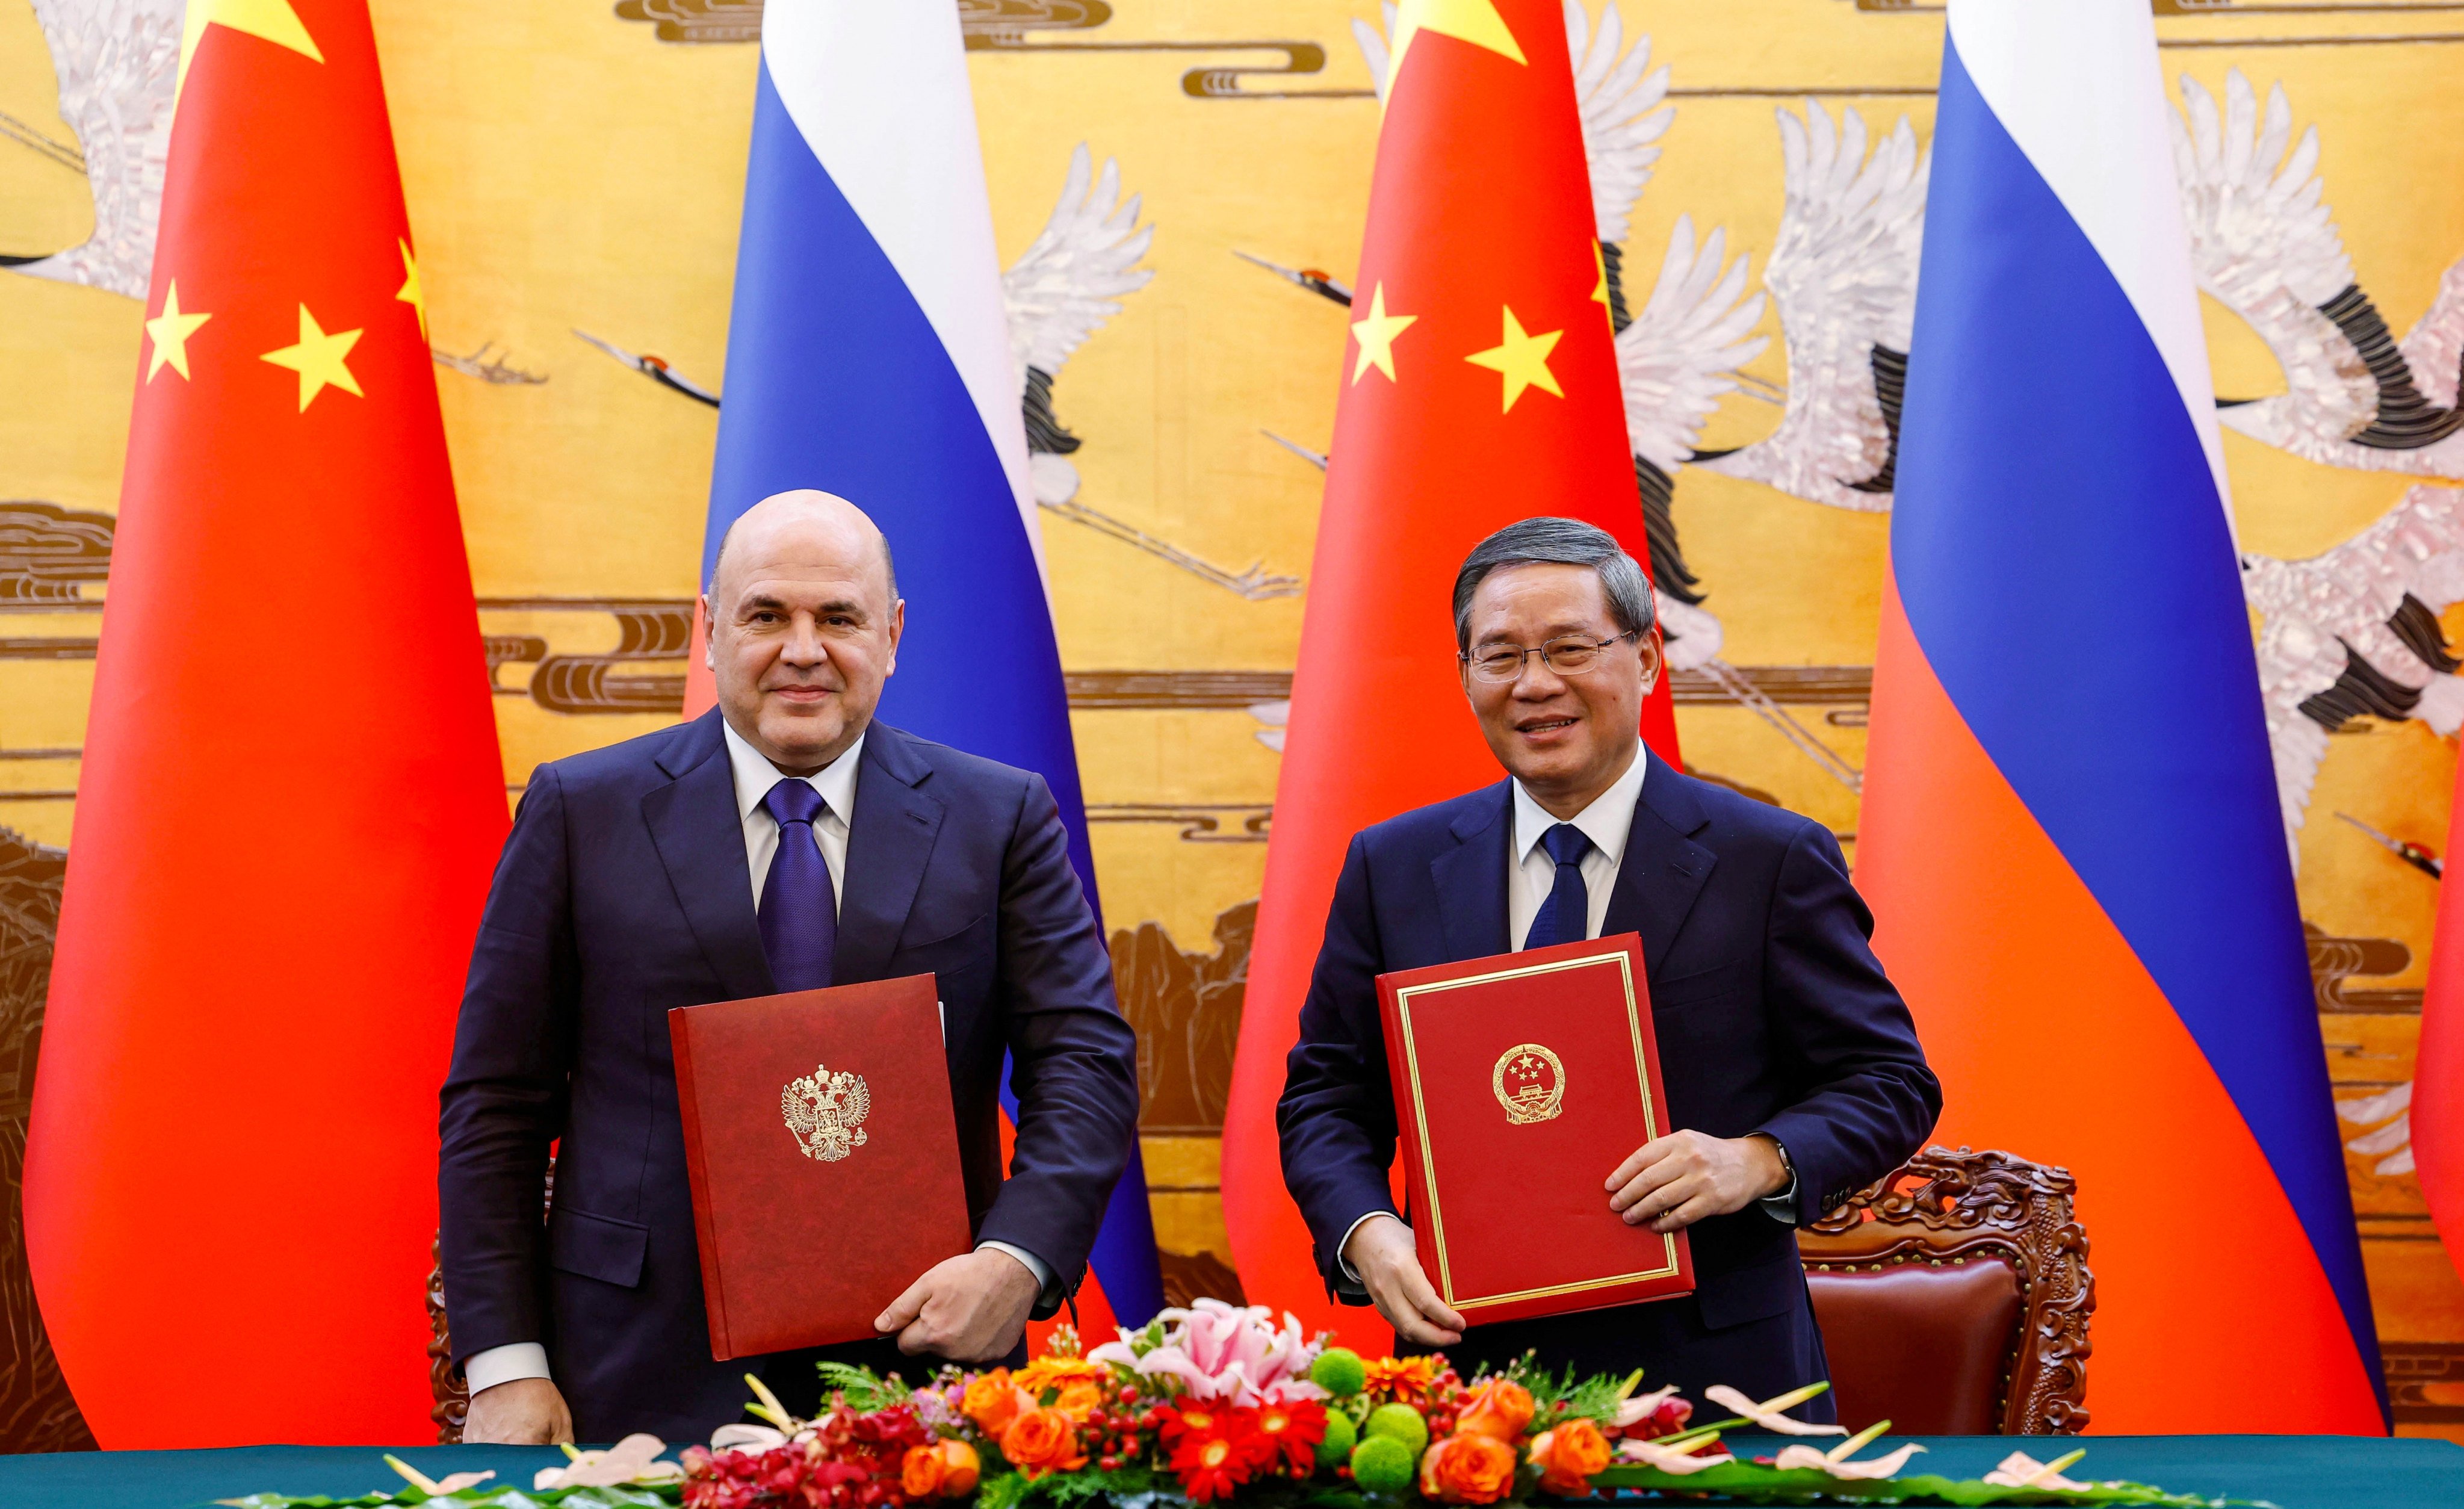 Russian Prime Minister Mikhail Mishustin (left) and Chinese Premier Li Qiang attend a signing ceremony during a meeting in Beijing on Tuesday. Photo: EPA-EFE